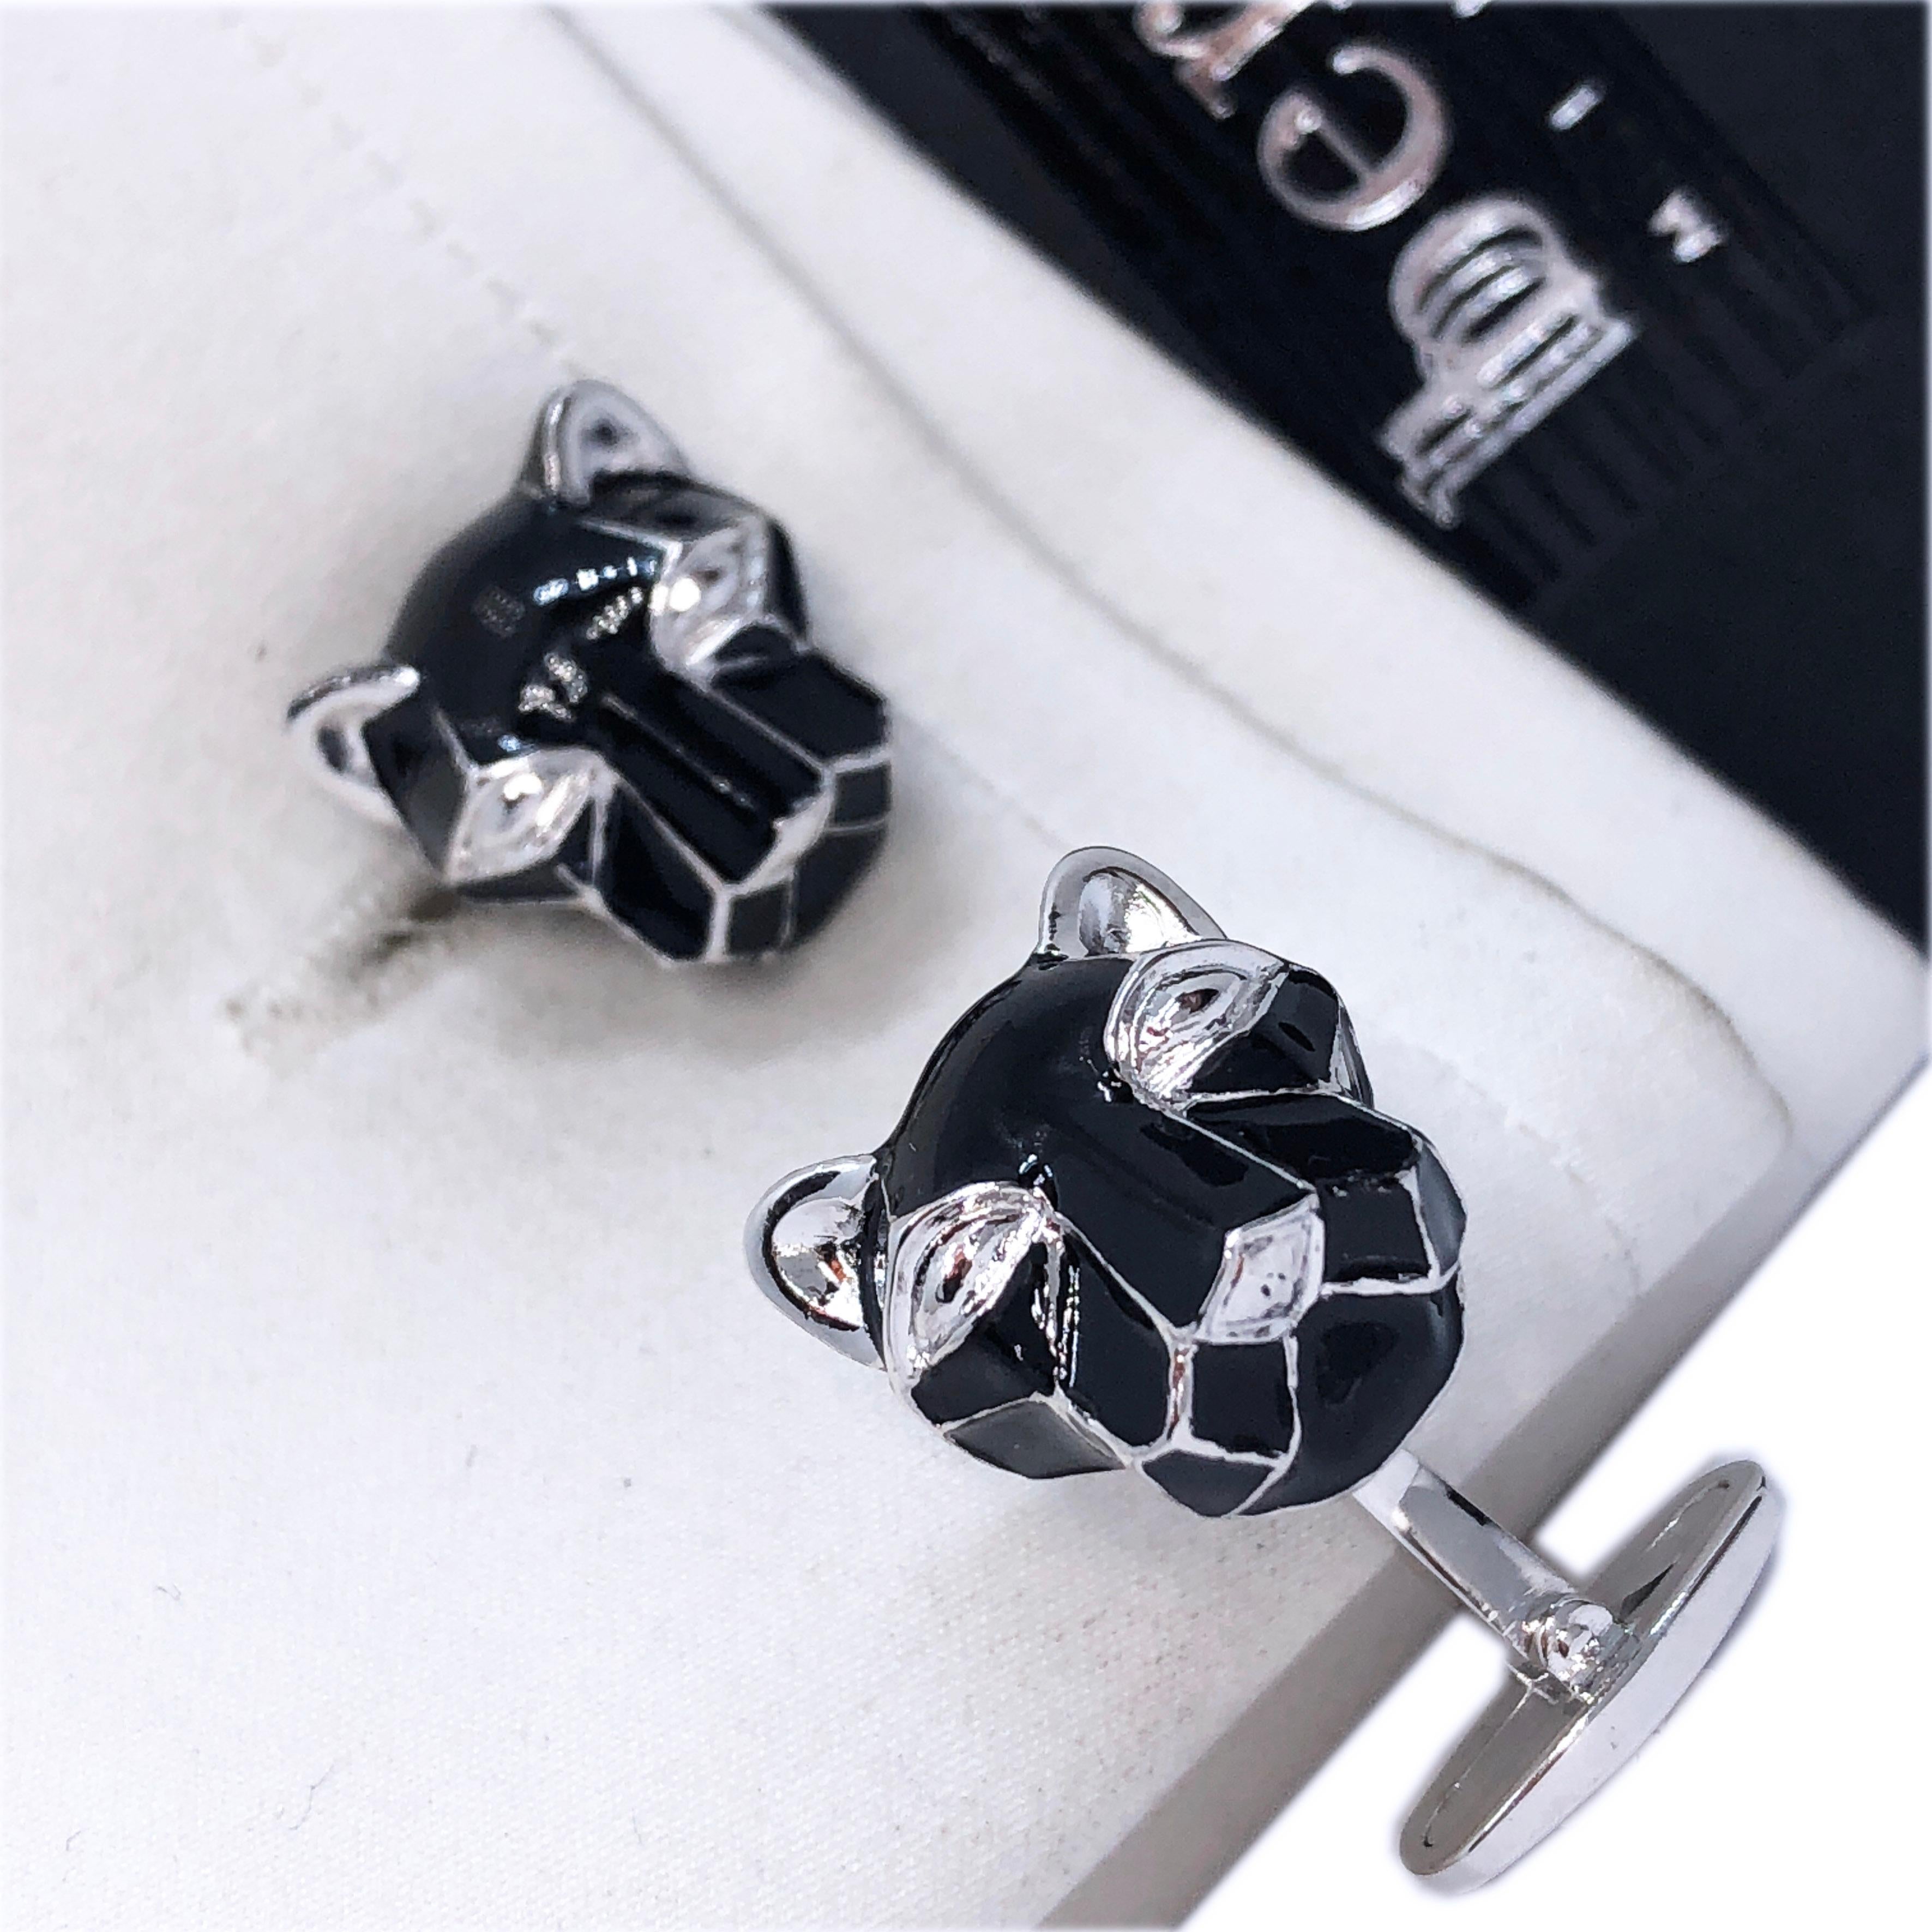 Contemporary Berca Black Hand Enameled Cougar Head Shaped Sterling Silver Cufflinks